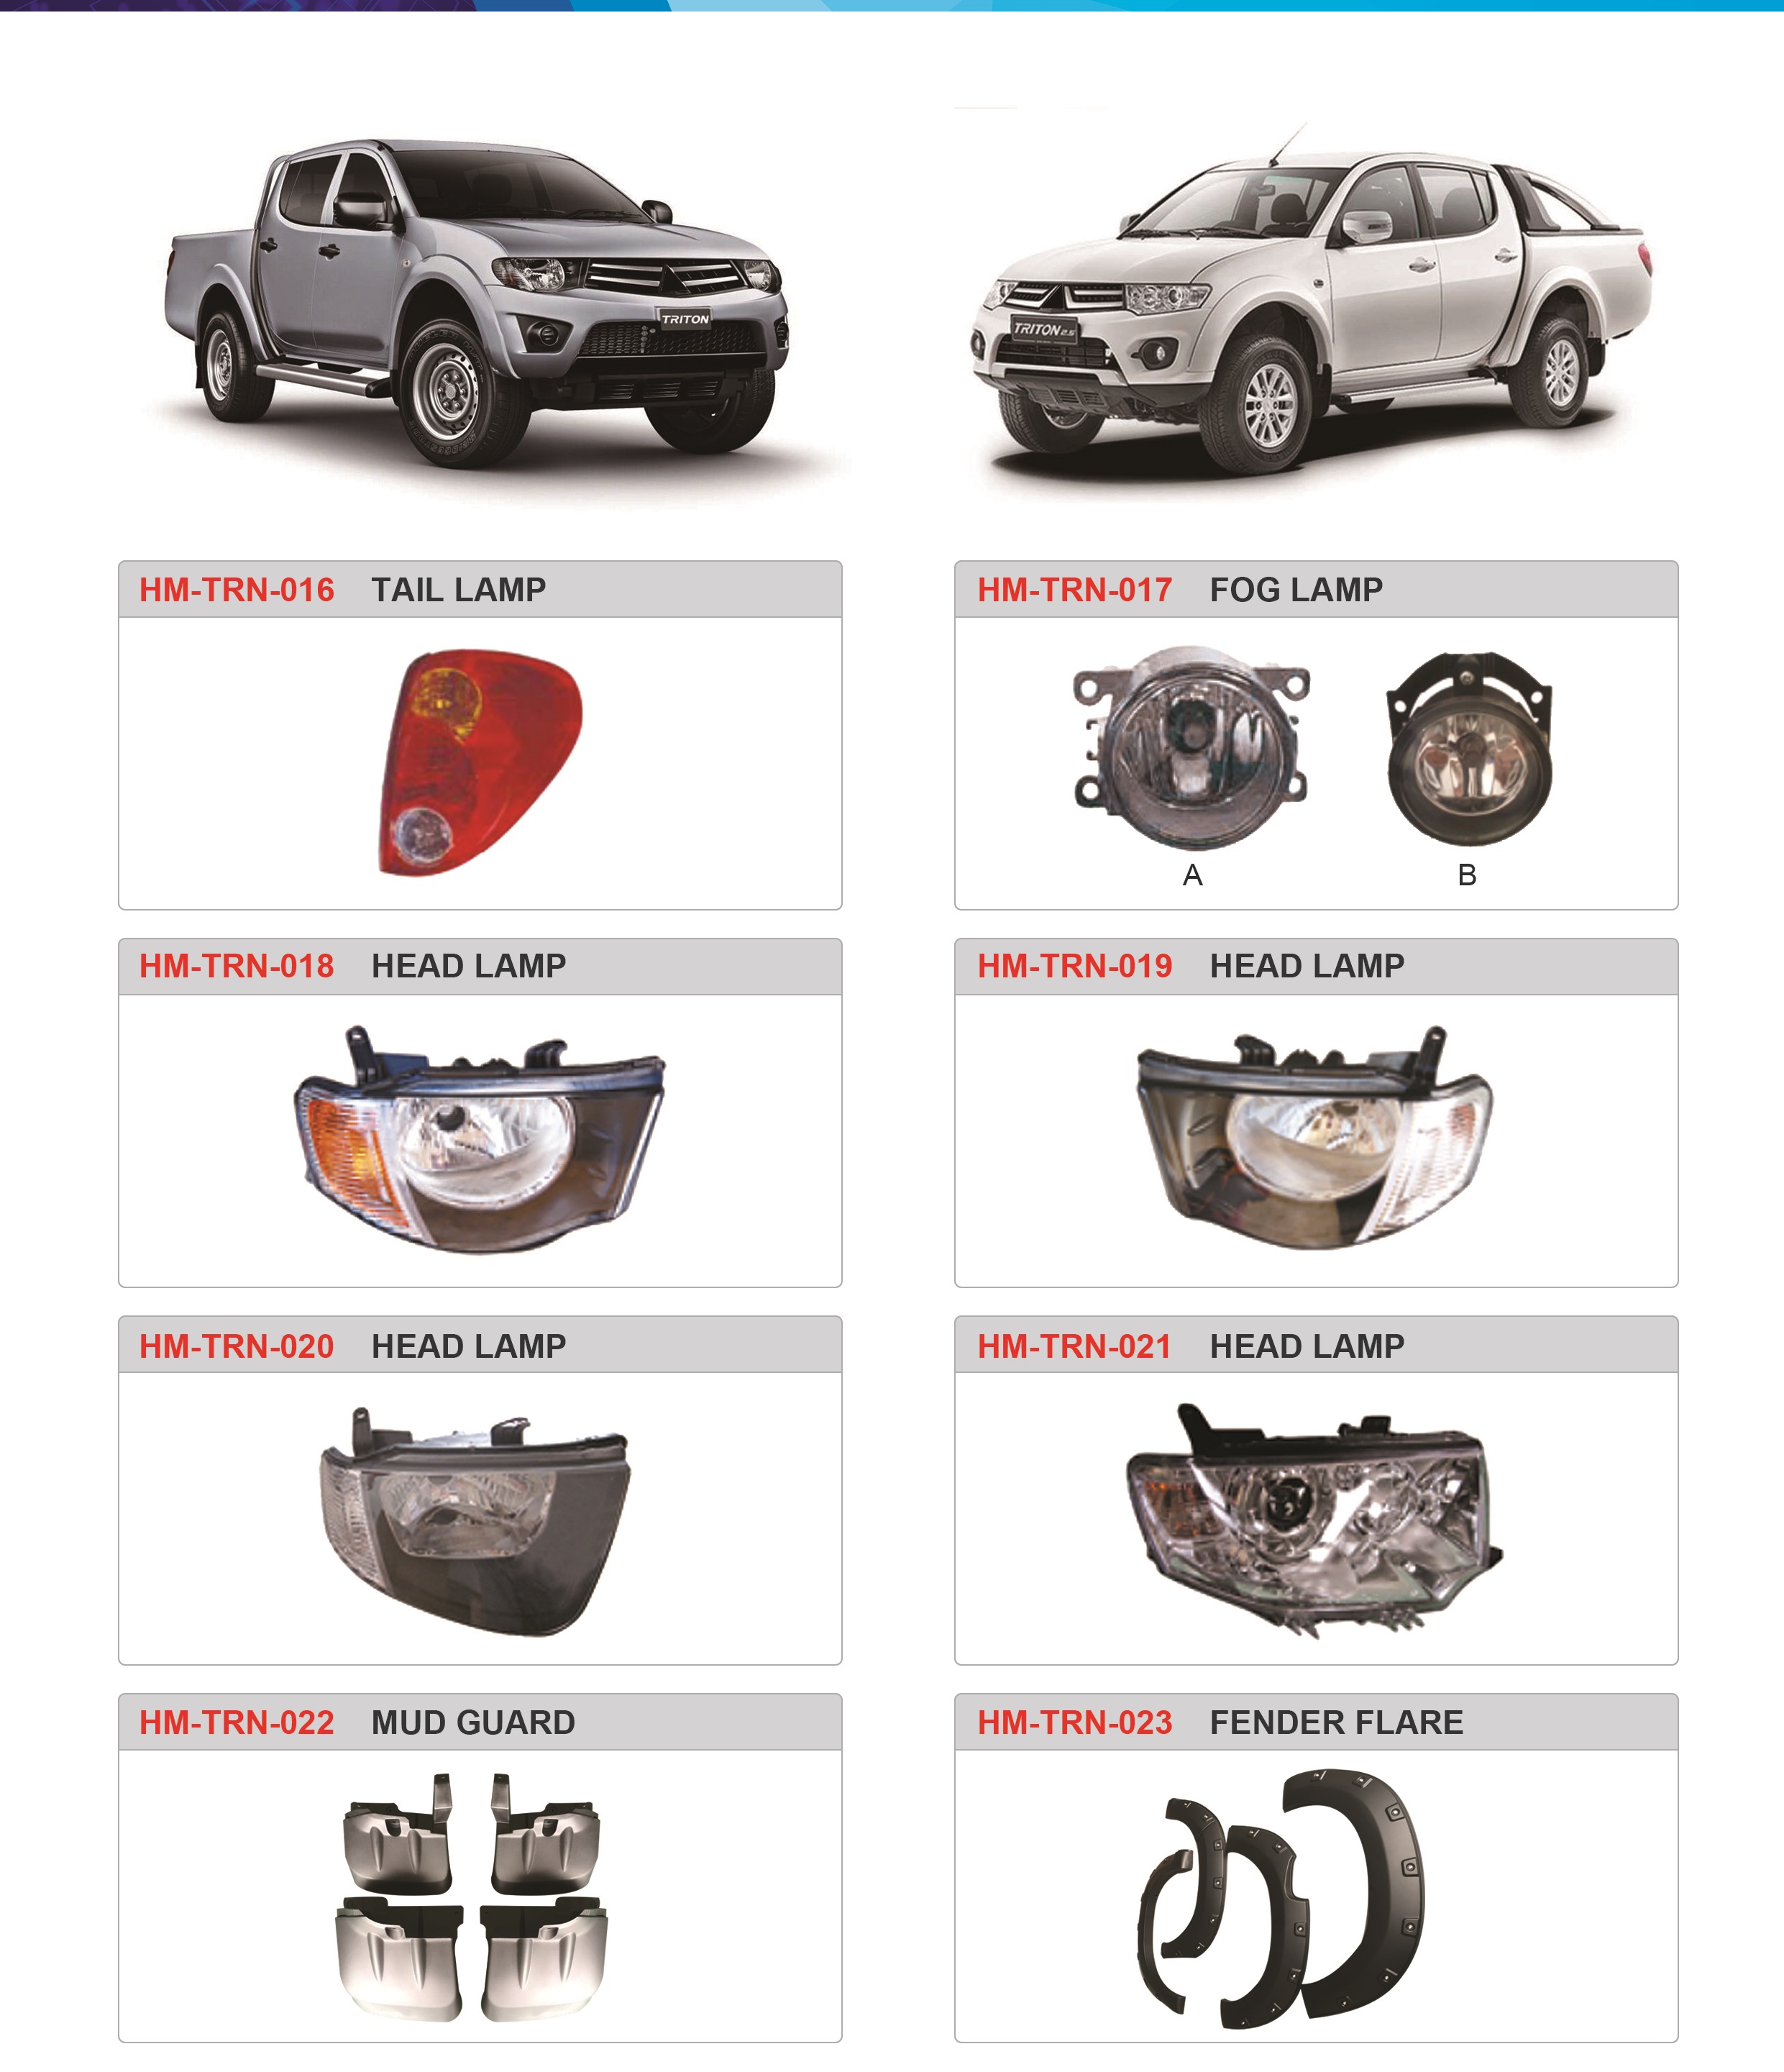 FOR 2012 TRITON L200 TAIL LAMP Featured Image